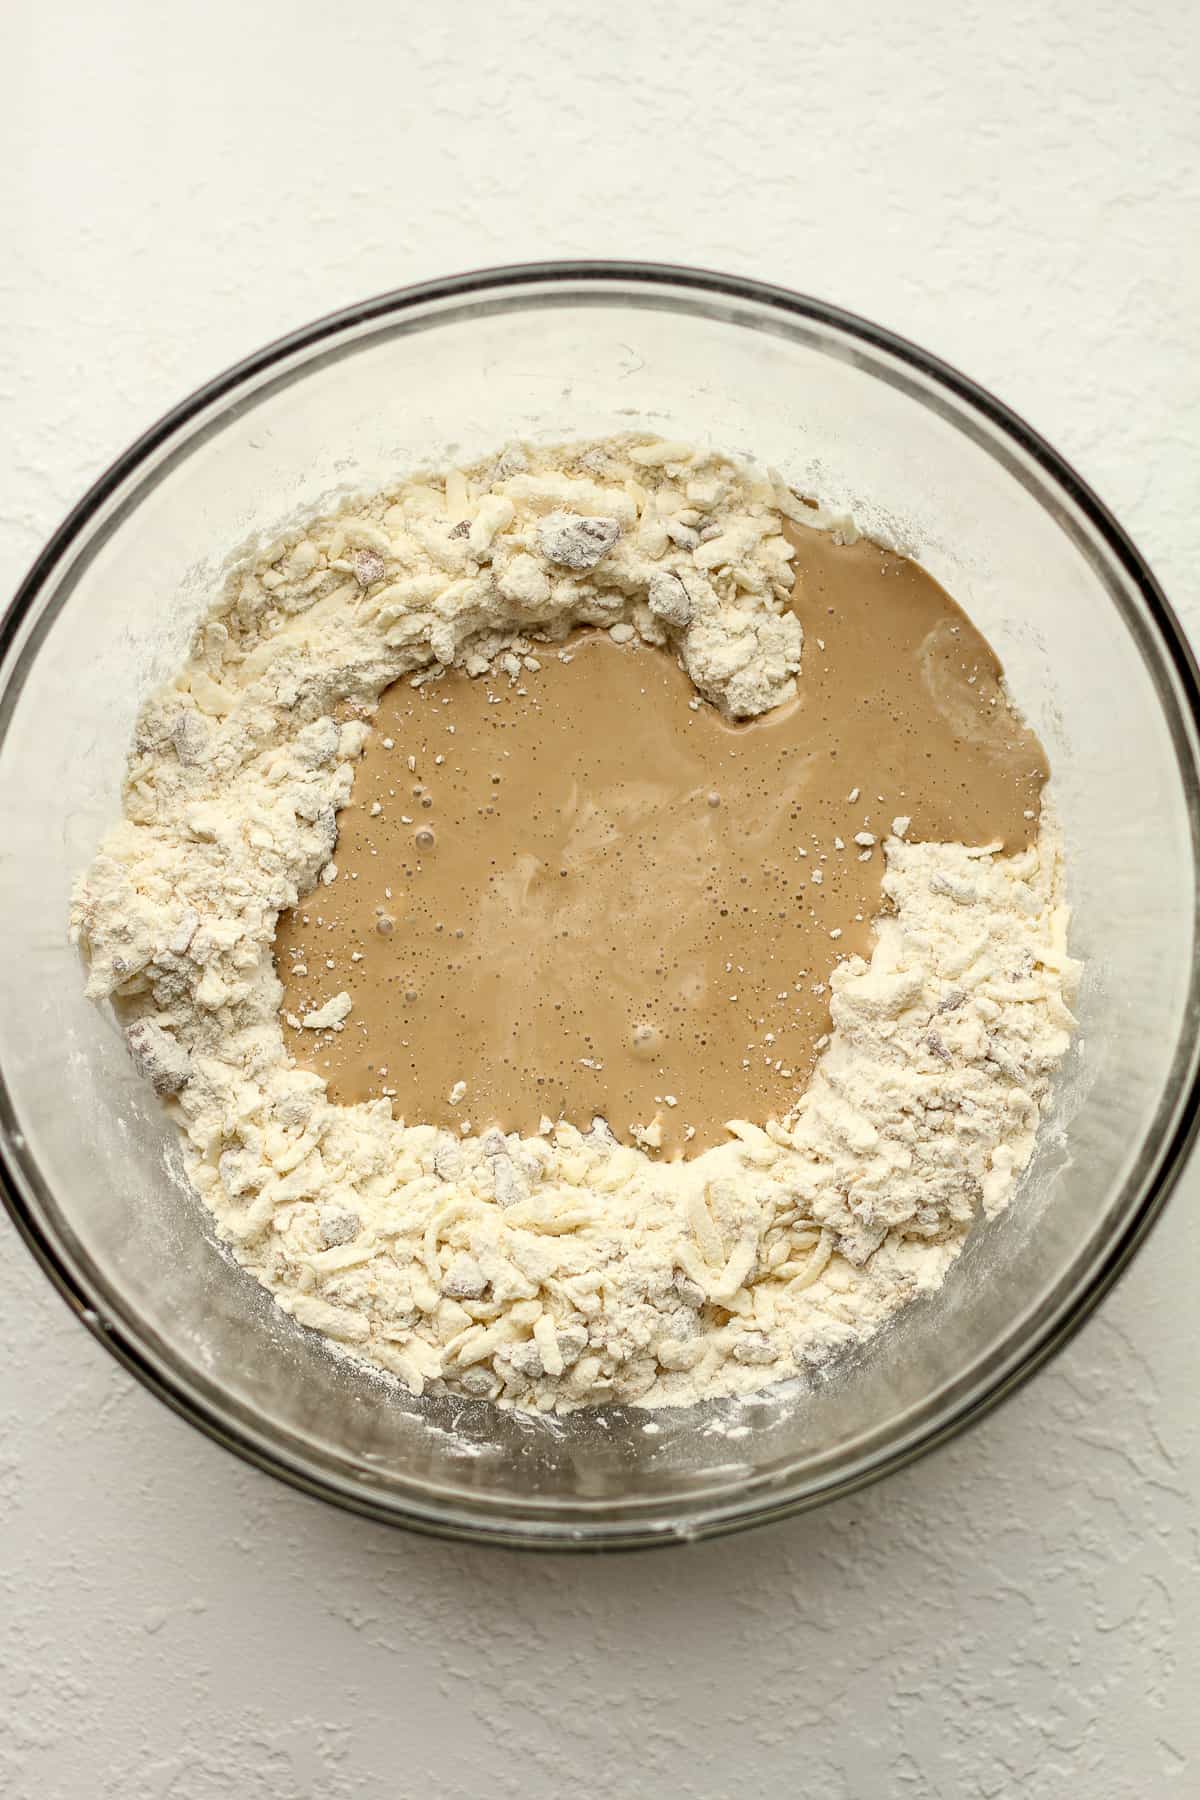 A bowl of the dry scone ingredients with the wet ingredients on top.